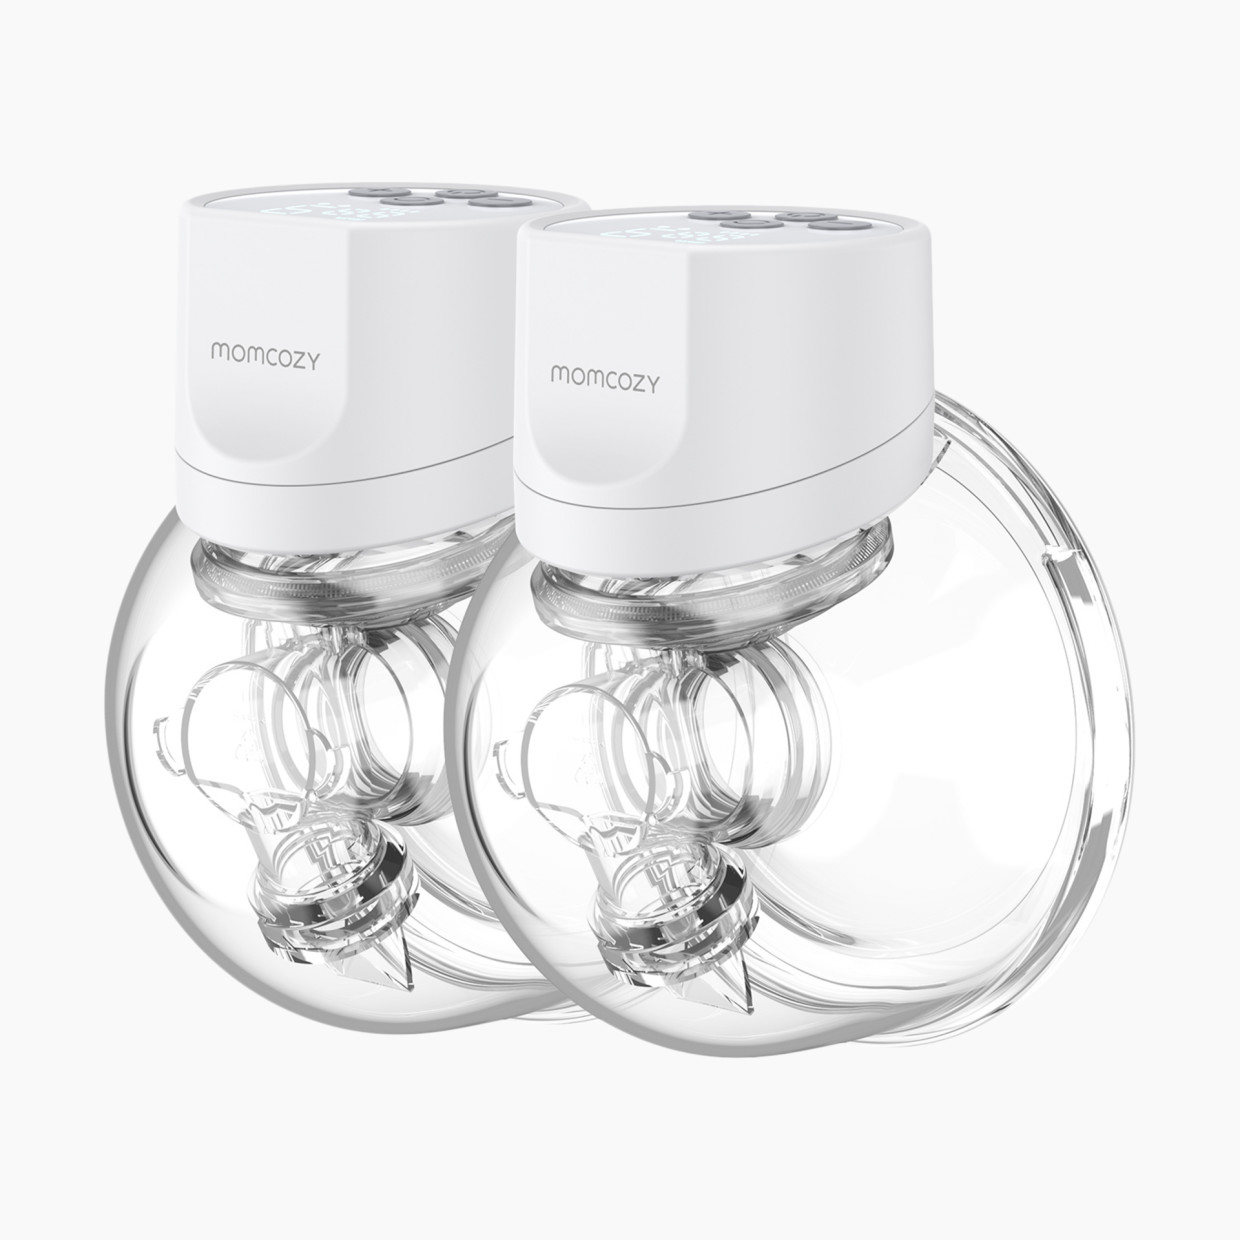 Wearable Hands Free Electric Breast Pump S12 – Baby2Kids